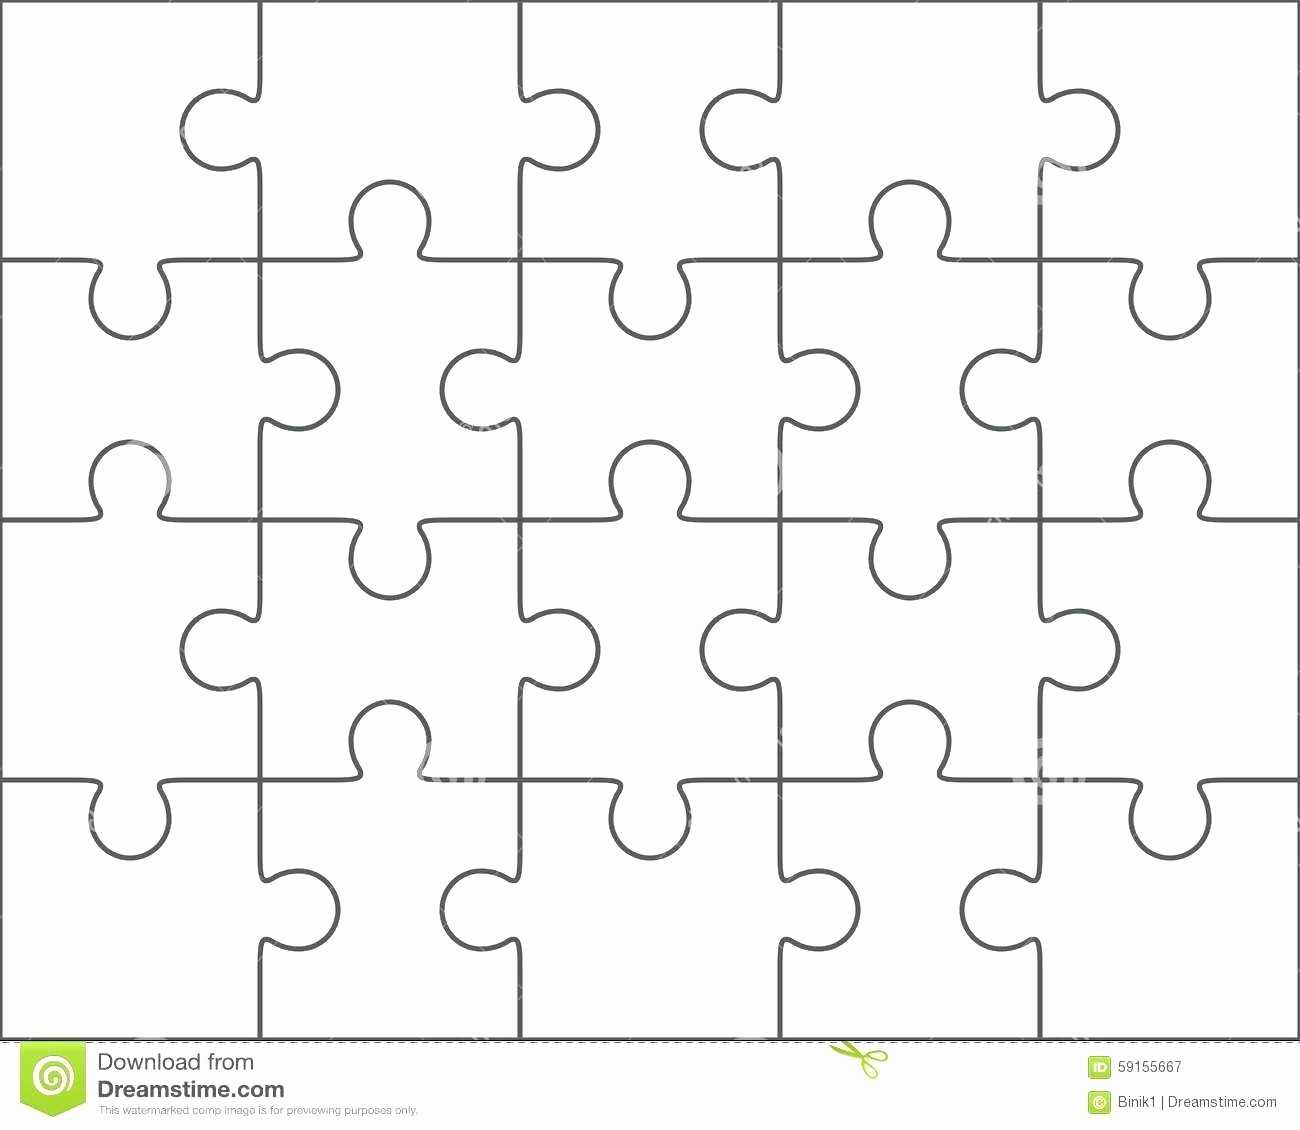 030 Puzzle Pieces Template For Word Best Of Piece Intended Within Jigsaw Puzzle Template For Word